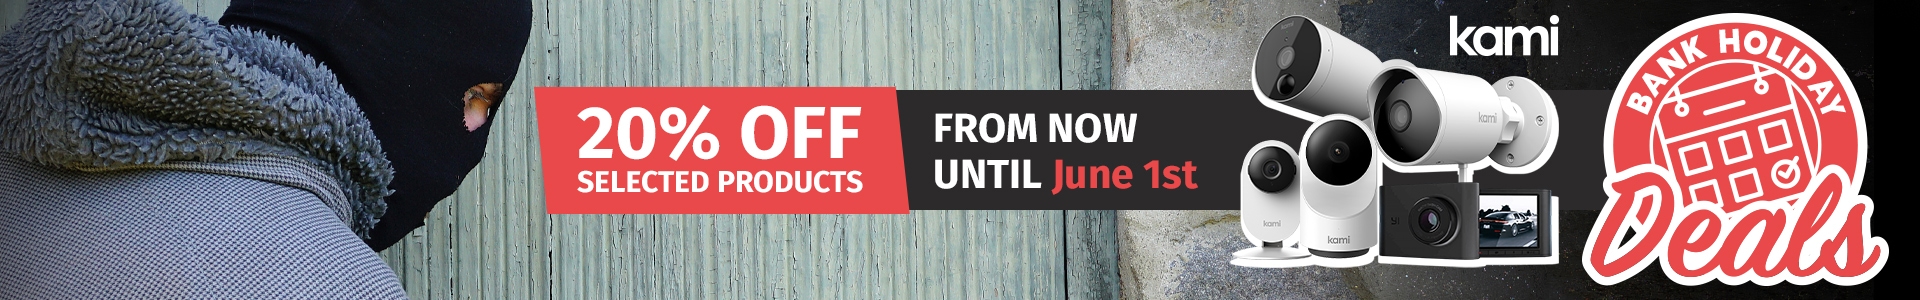 Kami Offer - 20% Off Selected Products